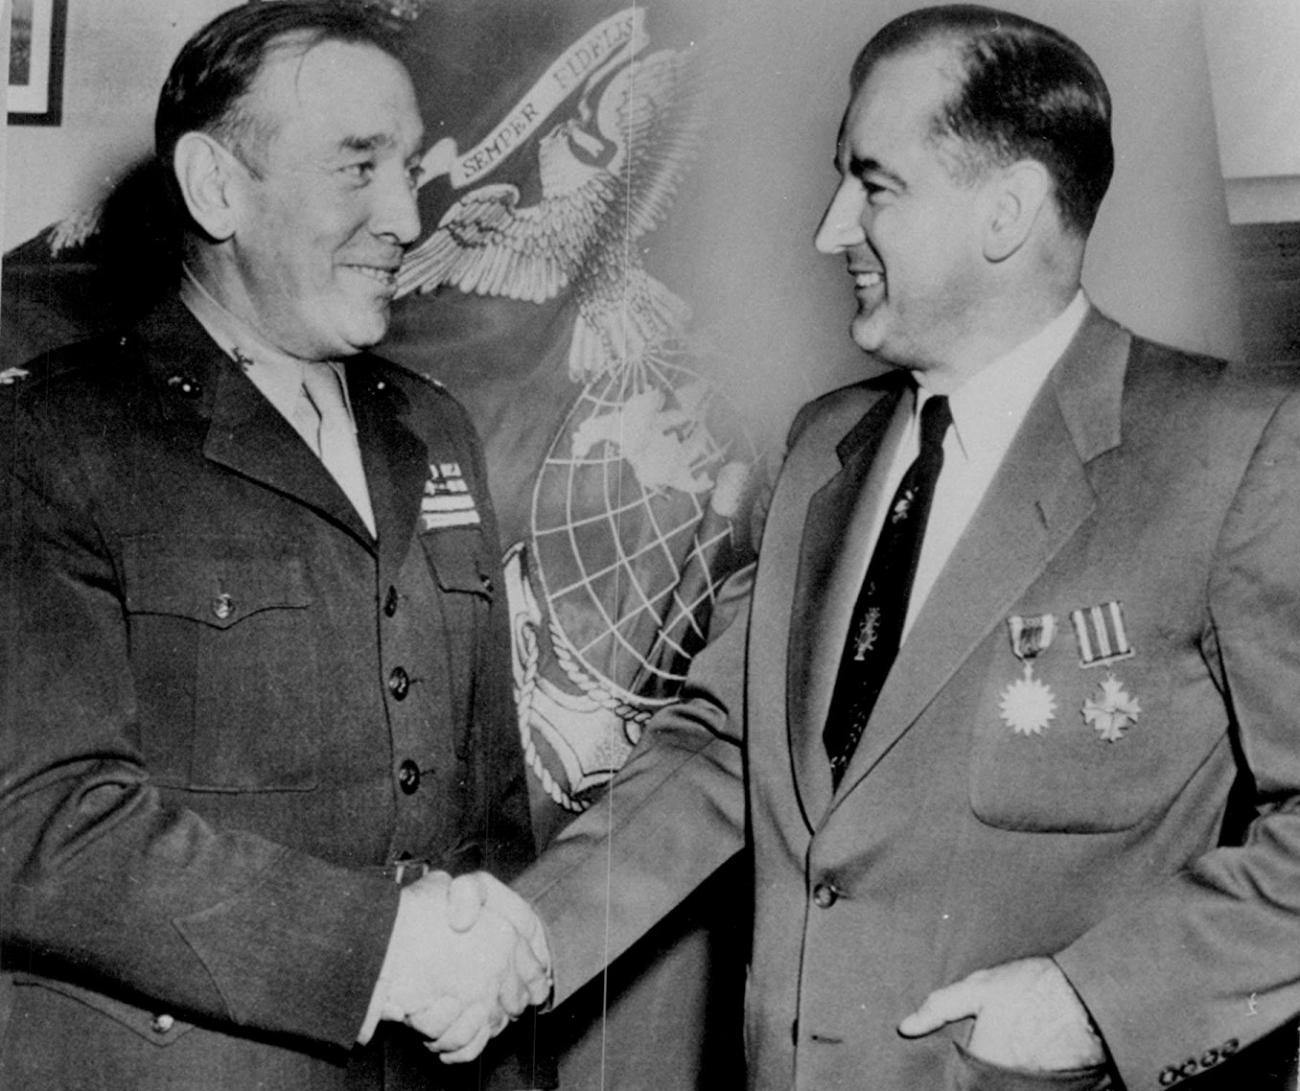 Historic photo shows McCarthy shaking hands with a uniformed officer. 